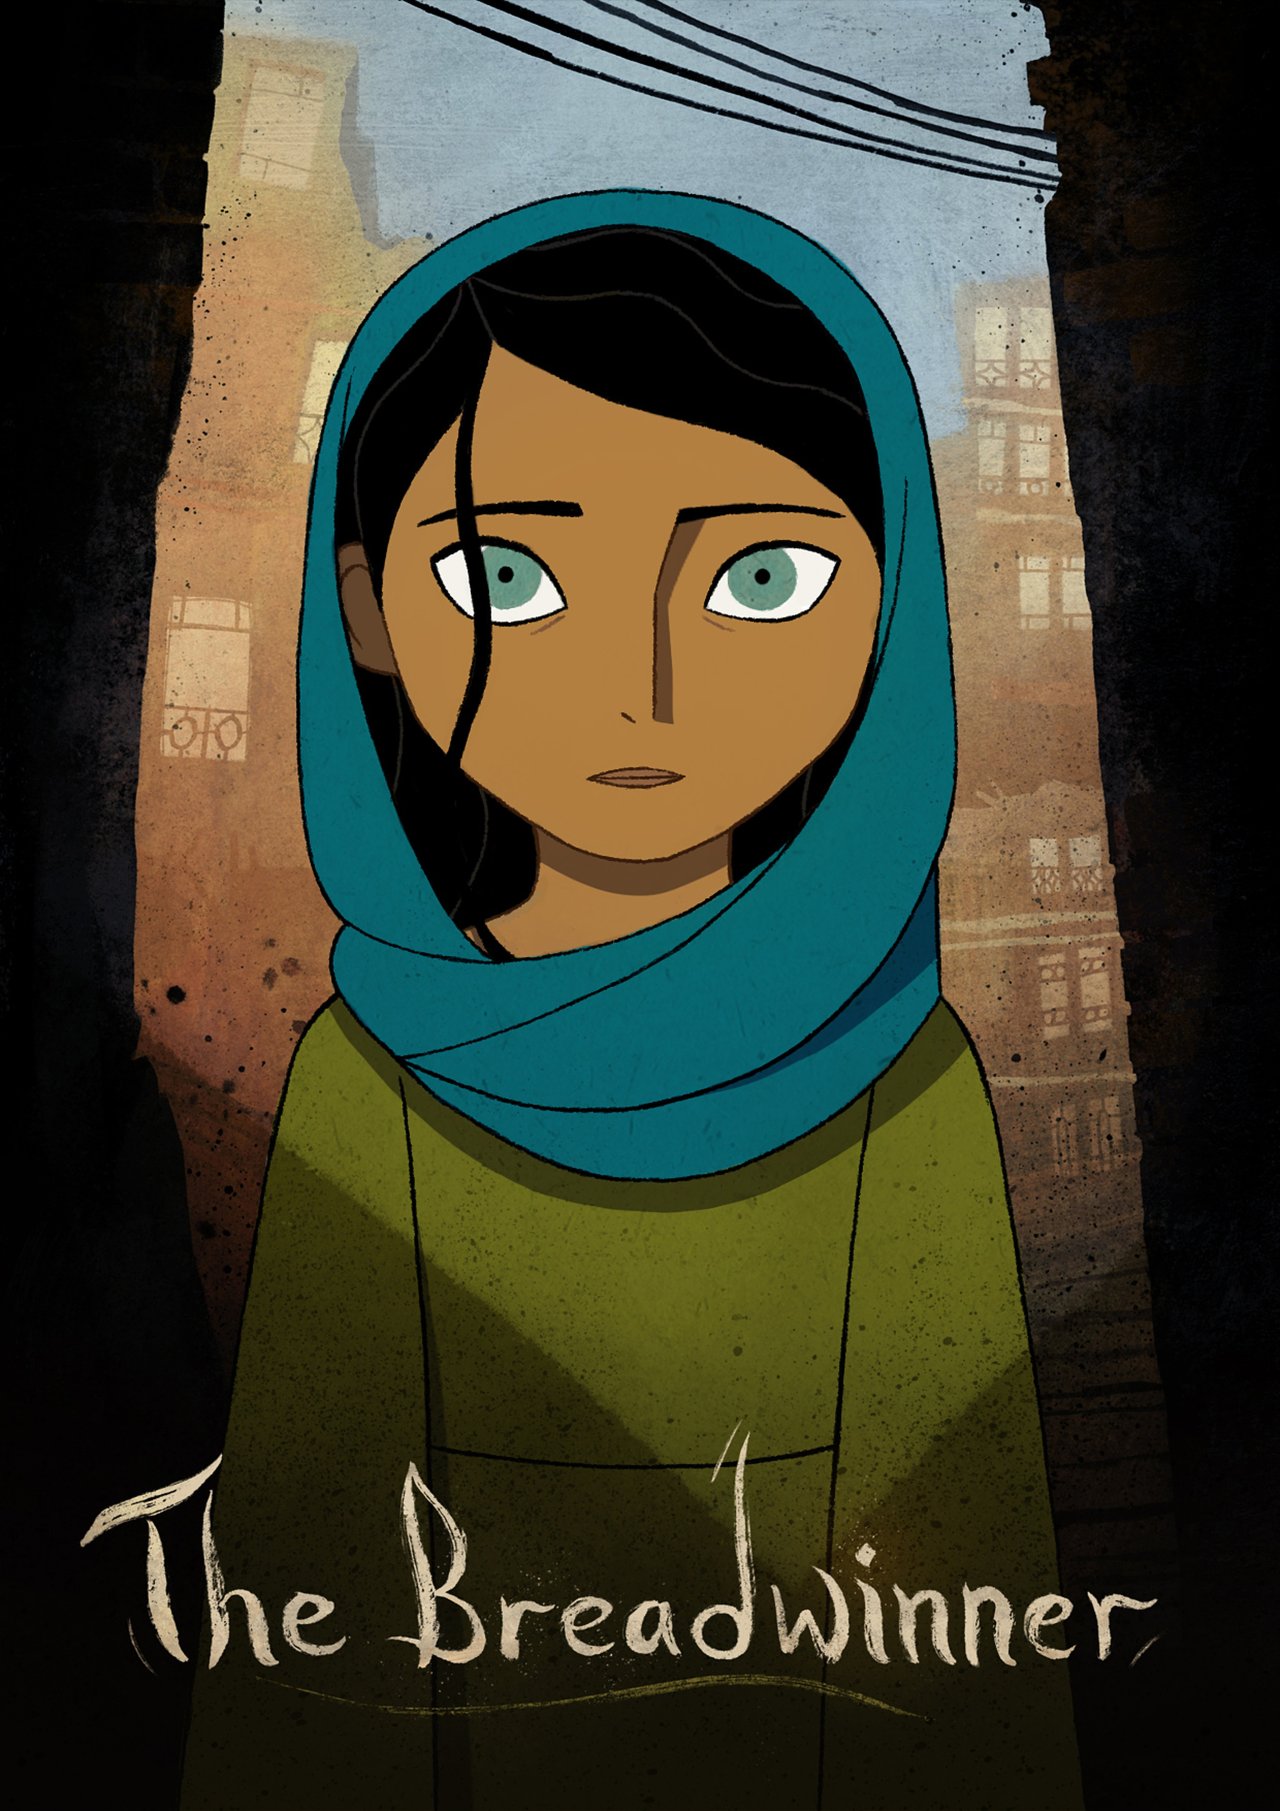 ca-tsuka:  1st pictures of “The Breadwinner” animated feature film directed by